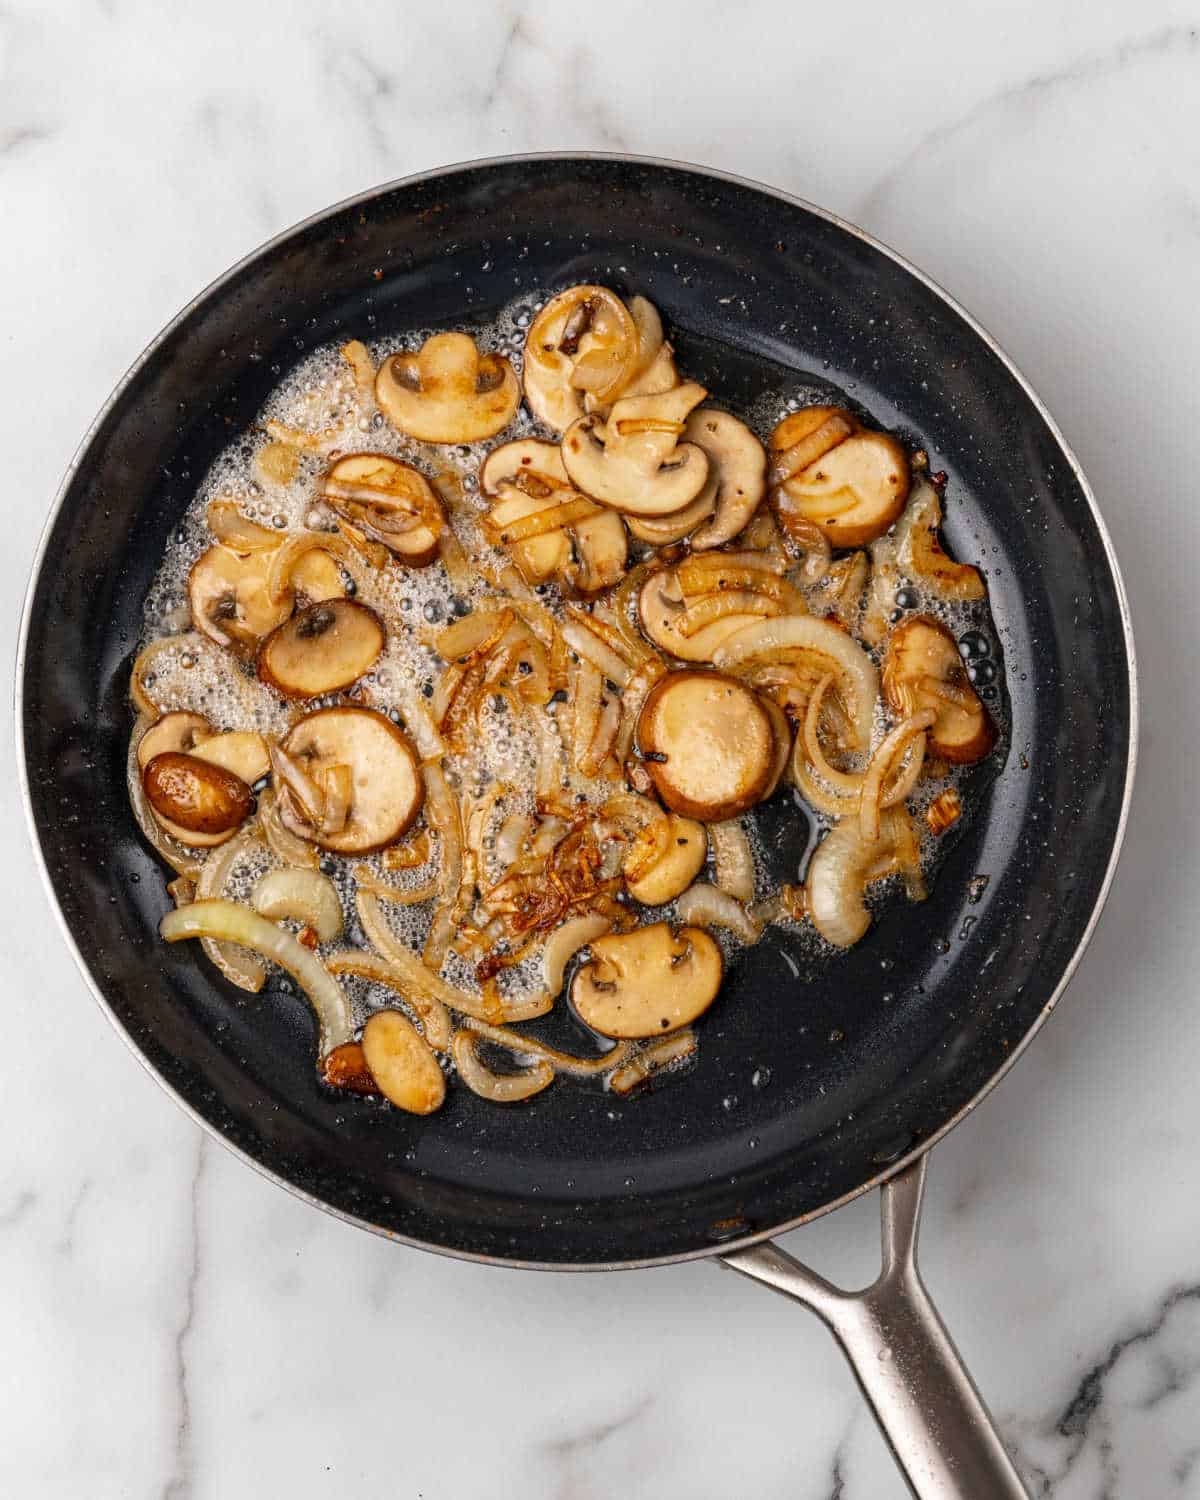 Mushrooms and onion cooked in a dark skillet. White marble surface.